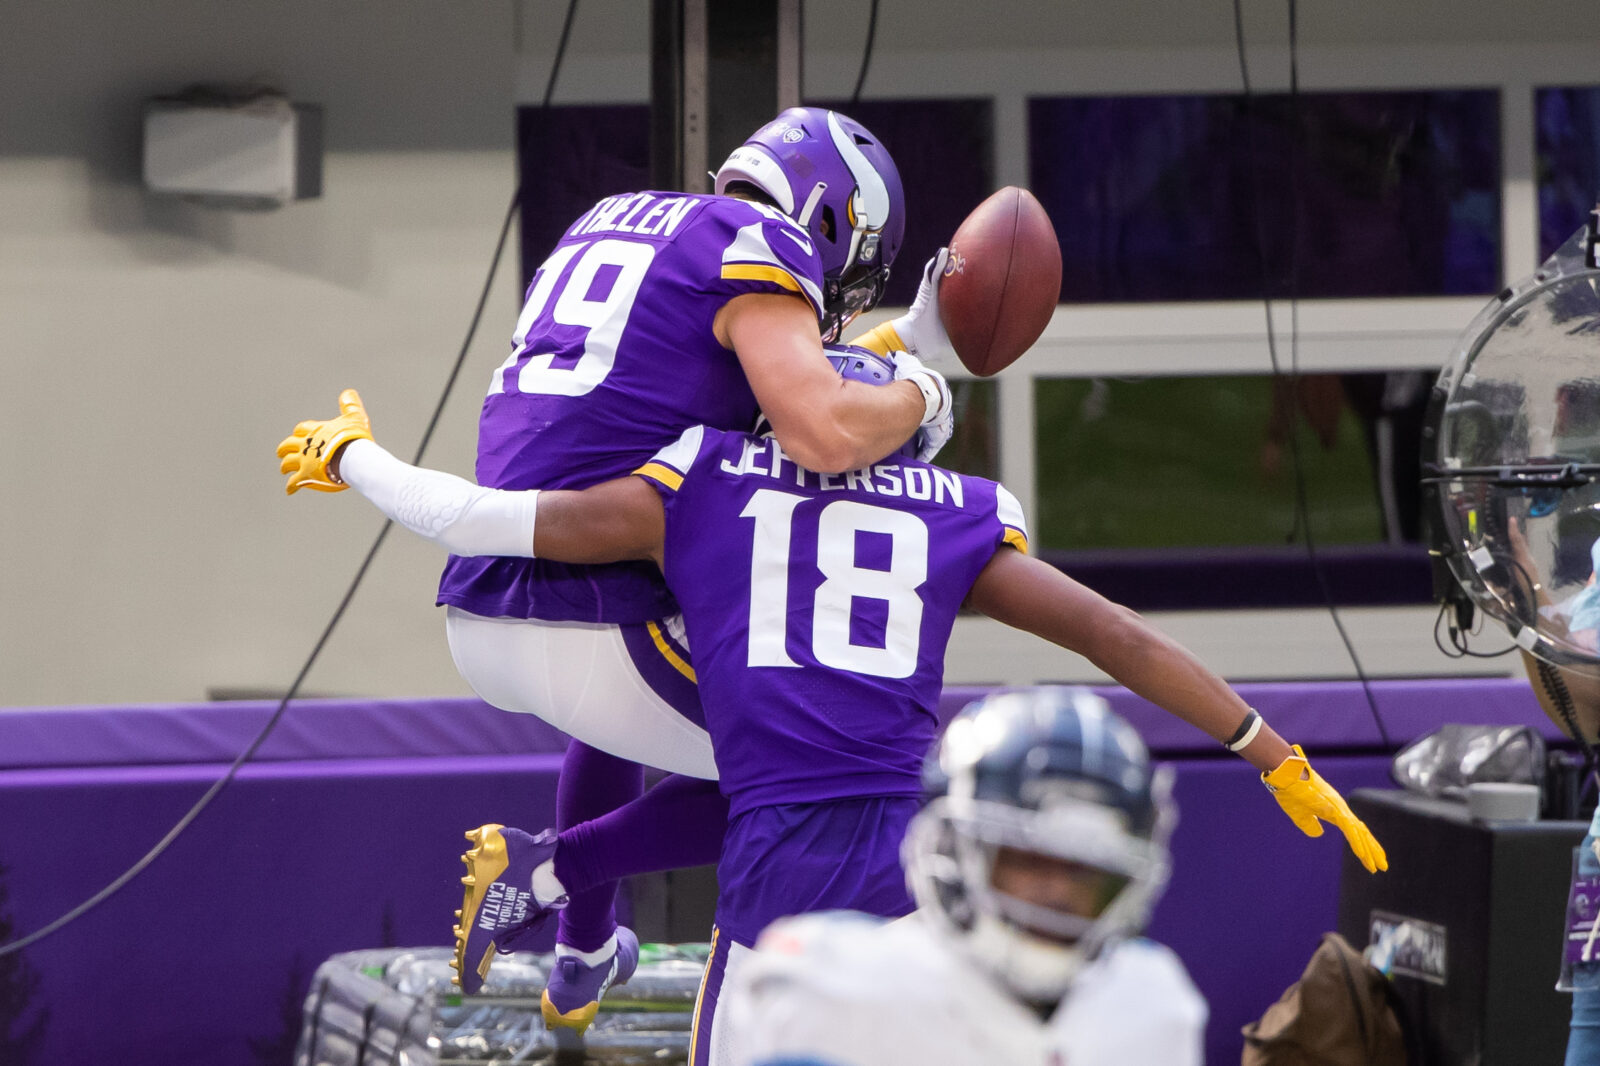 The Jefferson/Thielen Duo Has a Two-Year Timeline